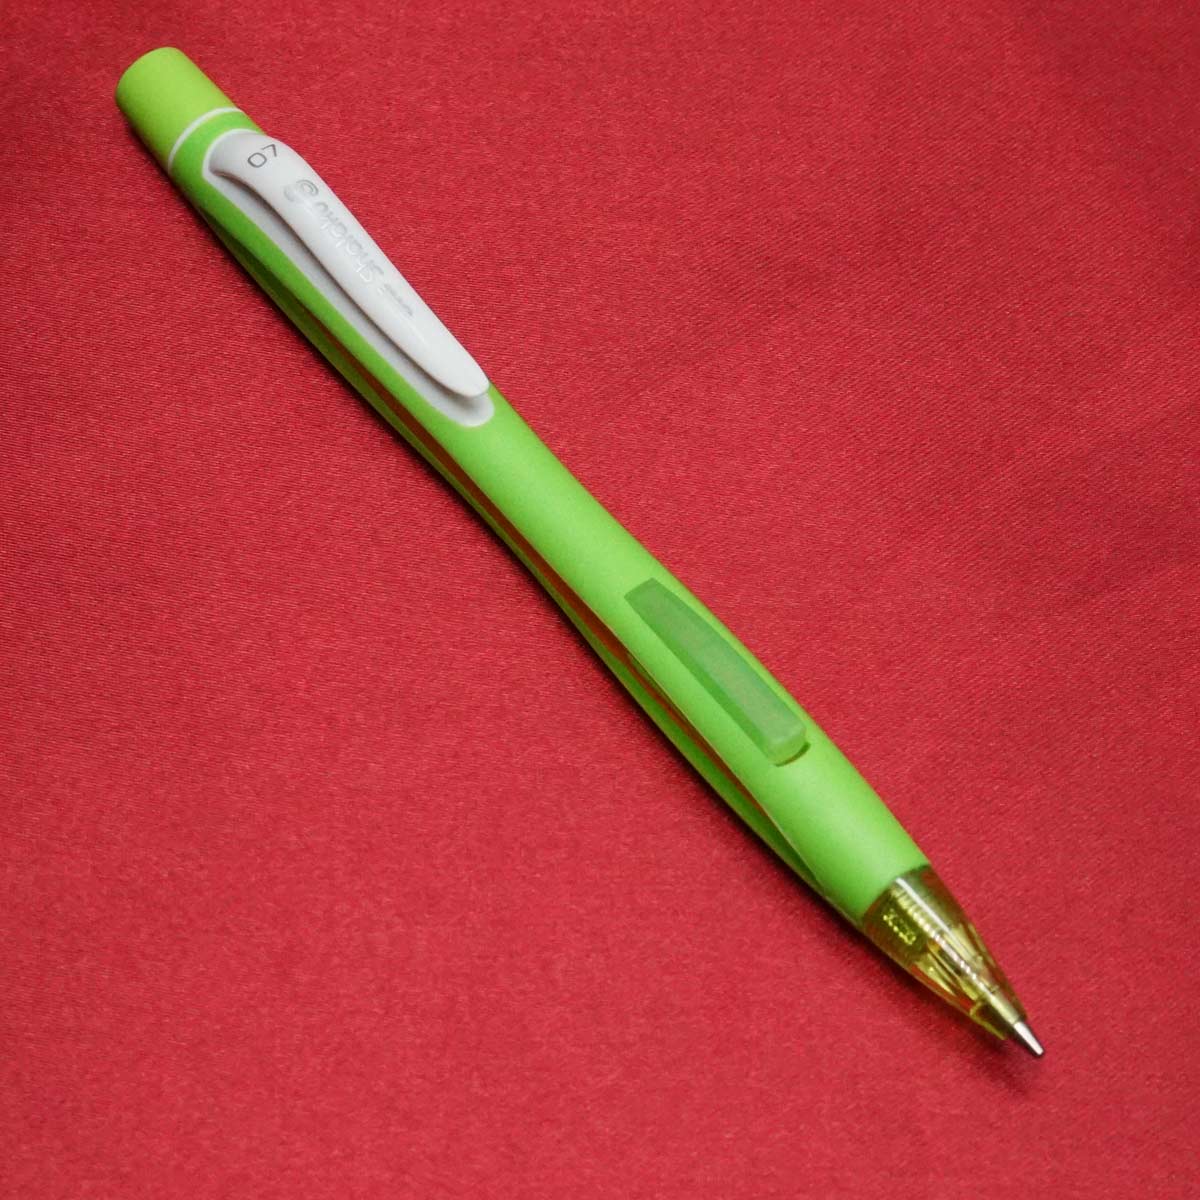 Uniball Shalaku Light Green Color Body With 0.7mm Tip Front Click Type Led Pencil SKU 21388